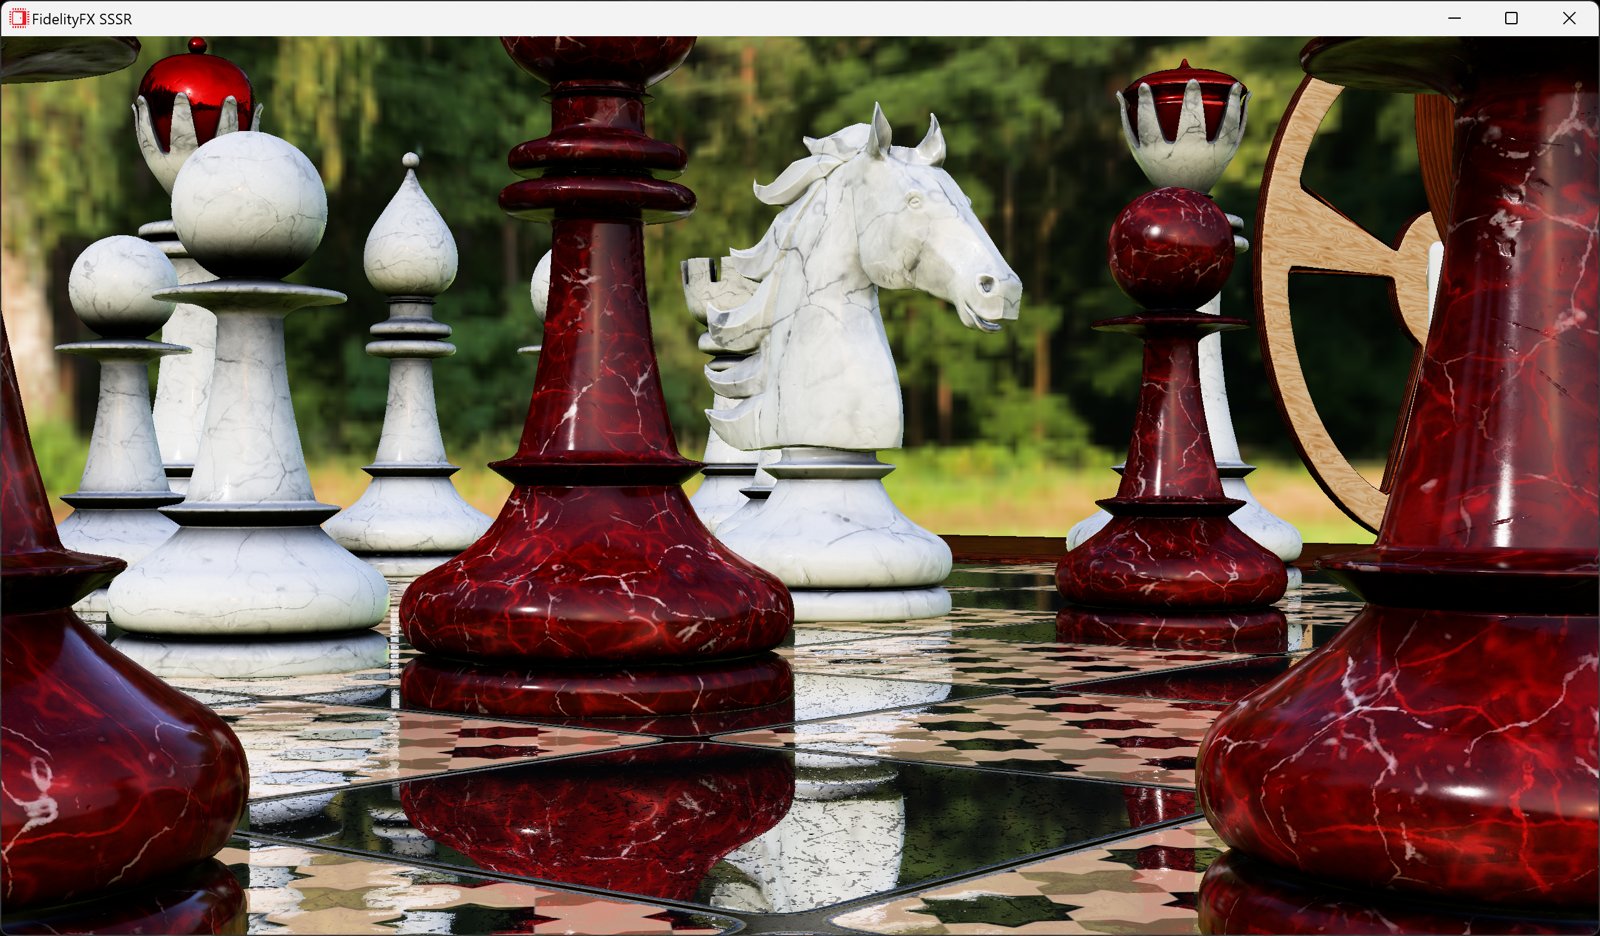 Chess pieces with SS reflections